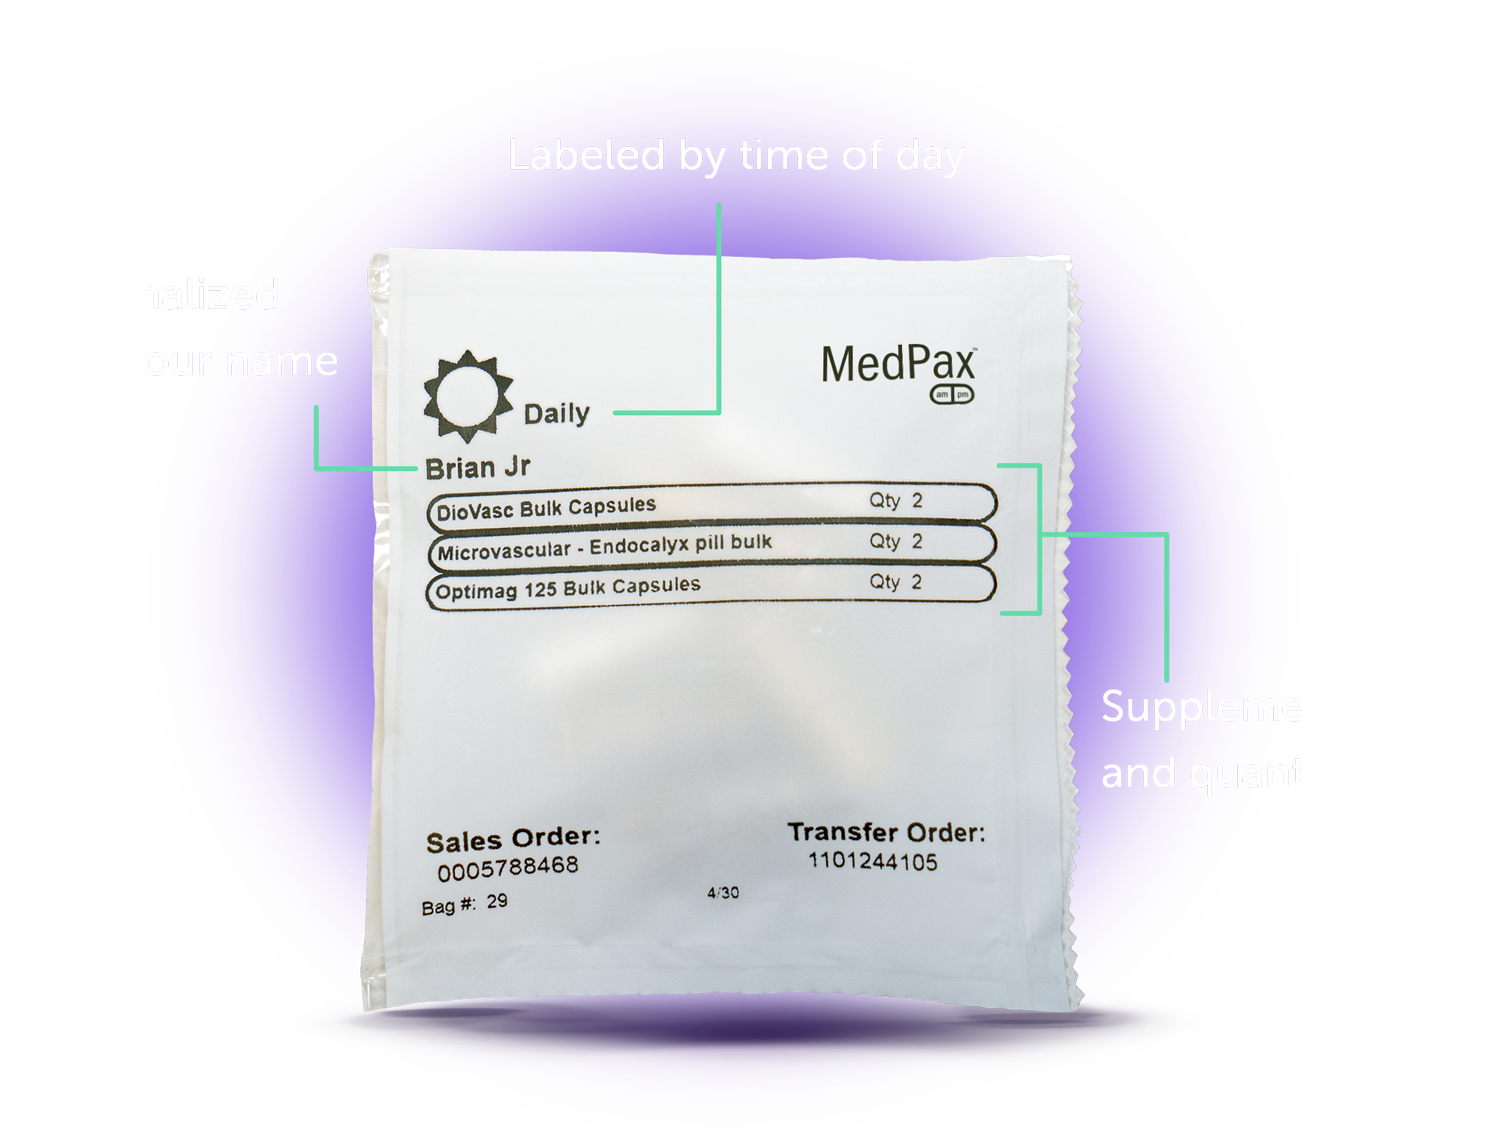 A MedPax packet. Personalized with your name, labeled by time of day, and showing the enclosed supplement's name and quantity.